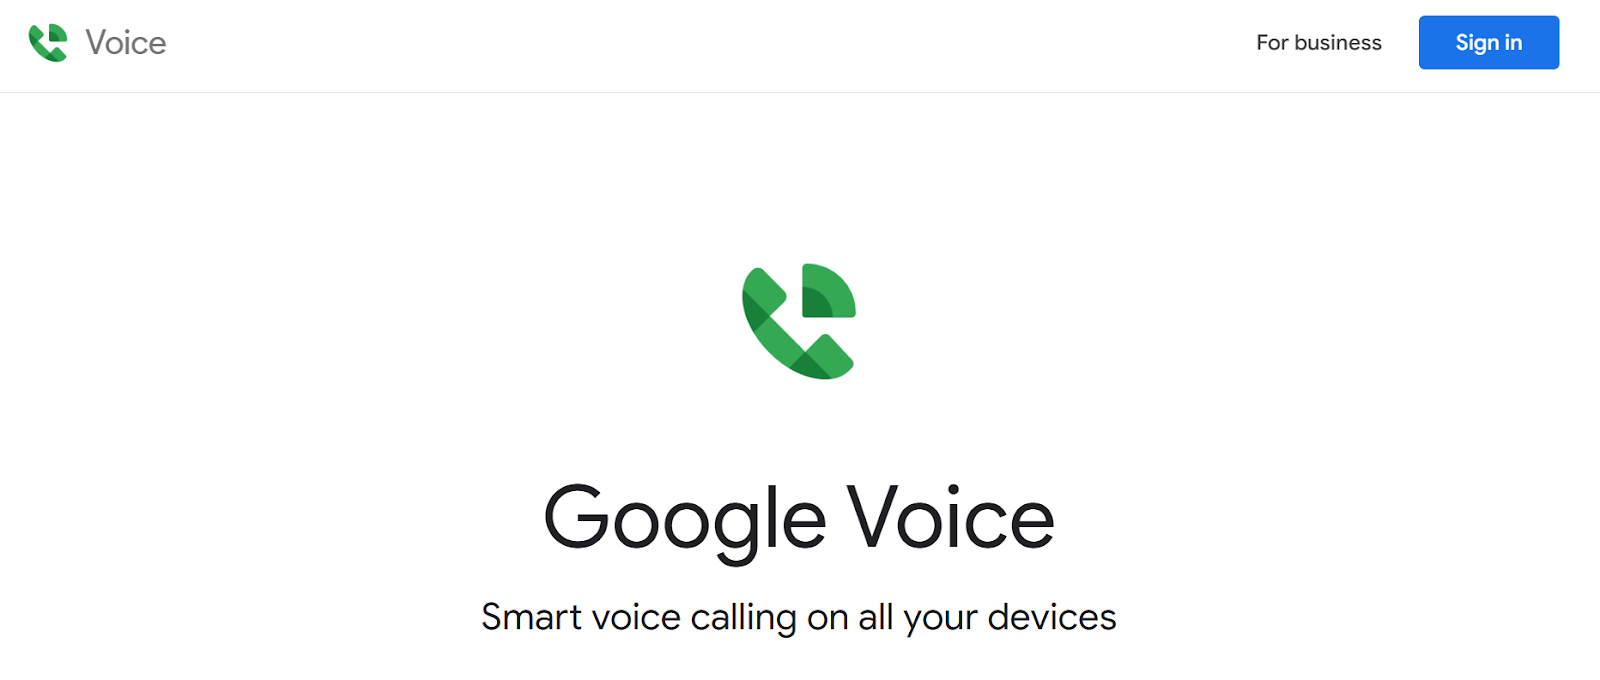 Googe Voice website snapshot highlighting the services it offers.